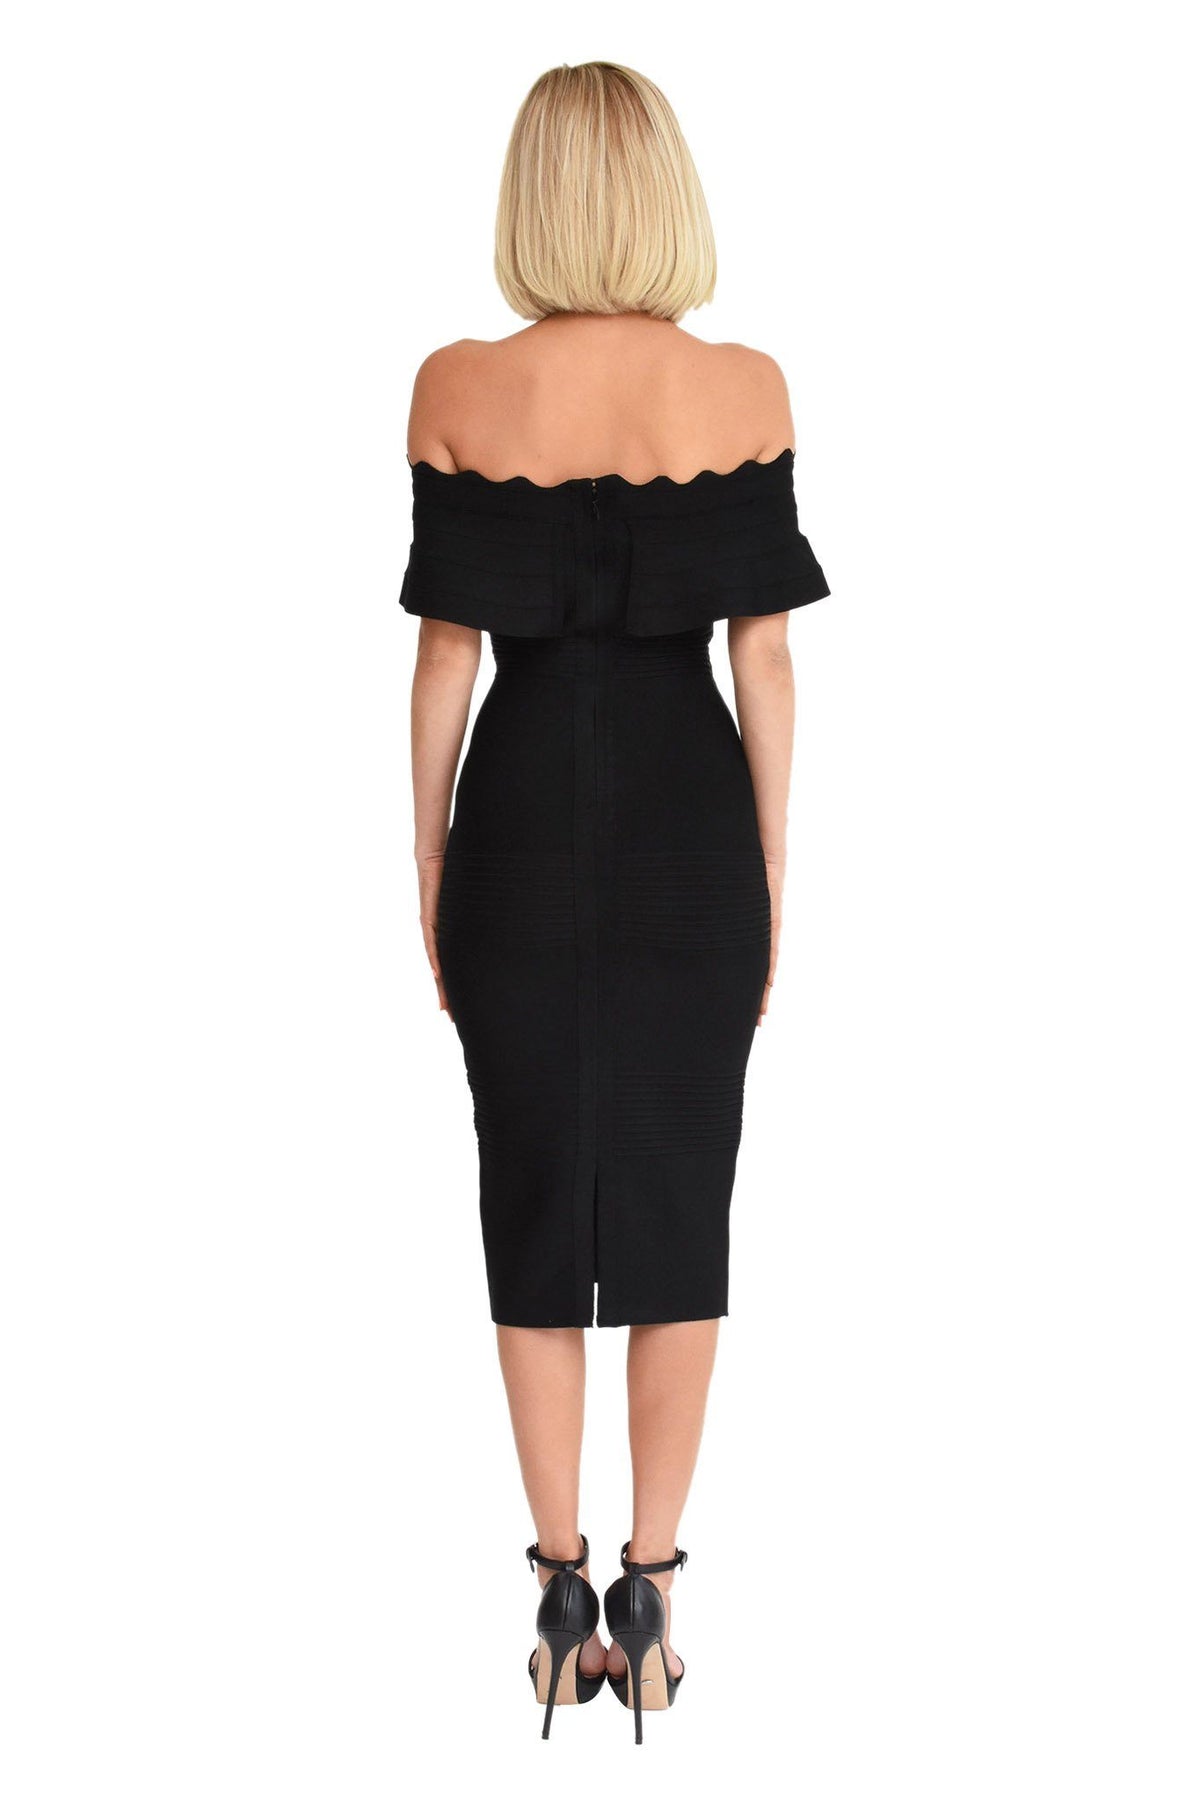 Back of black peplum frill ruffle top bodycon below knee length bandage form fitted dress with back slit